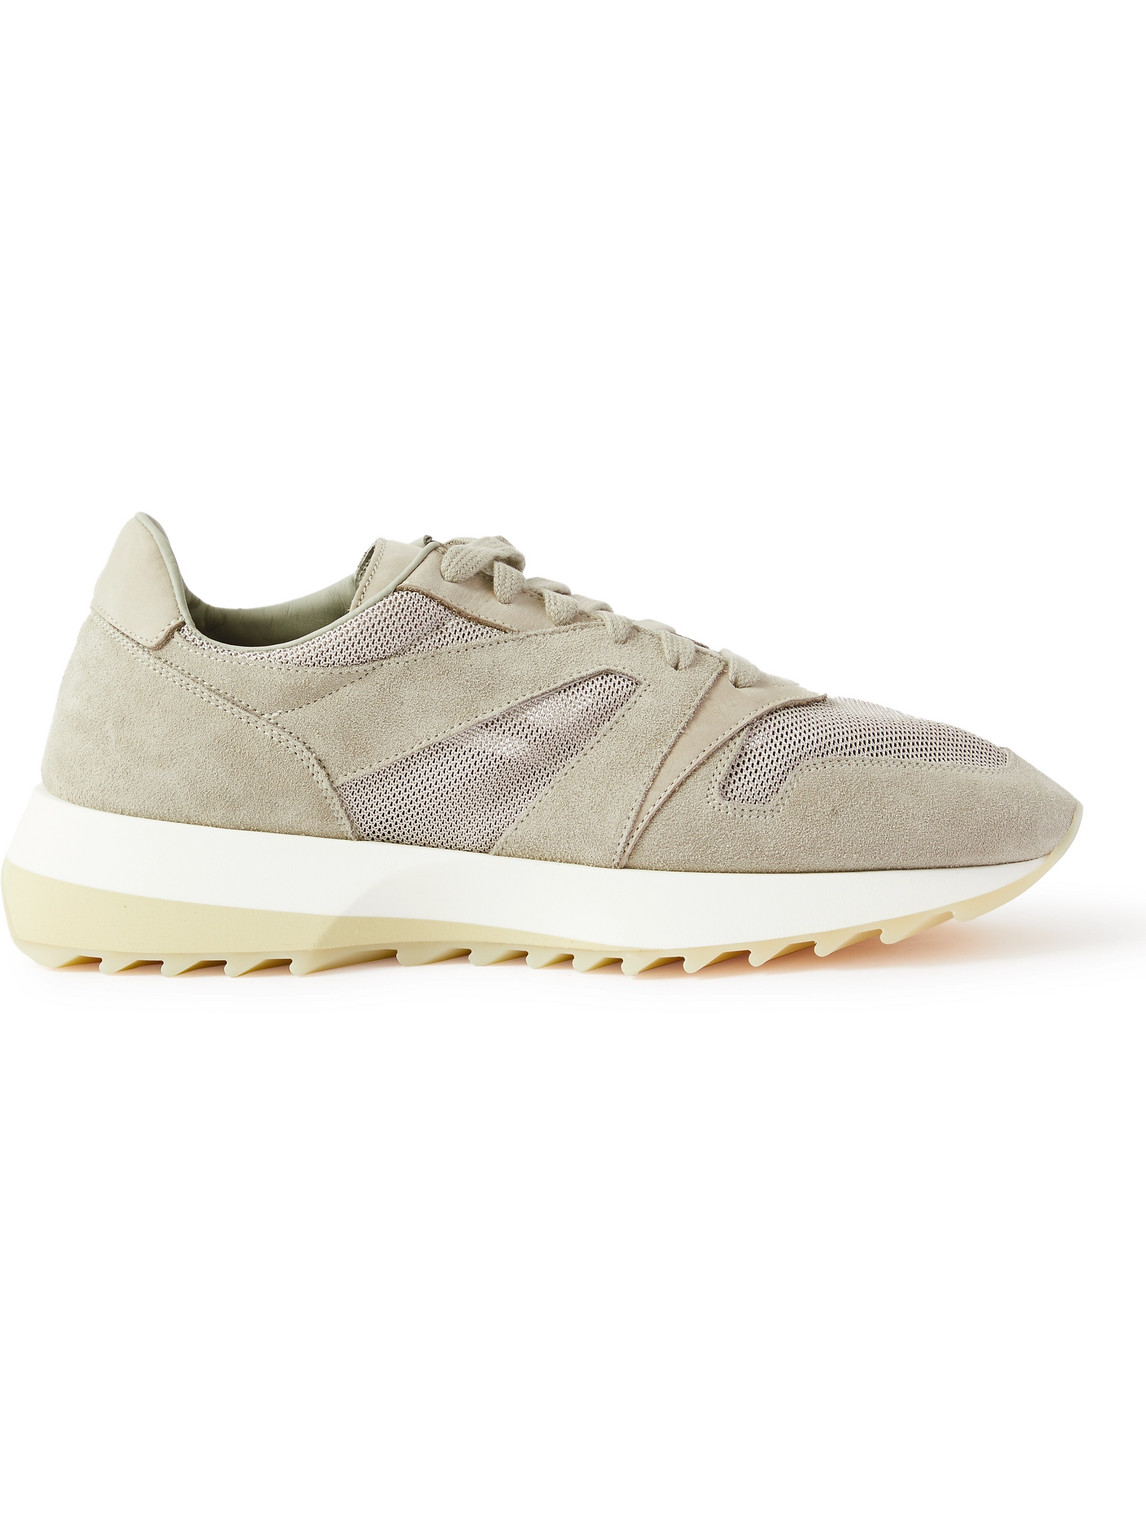 Panelled Suede and Mesh Sneakers